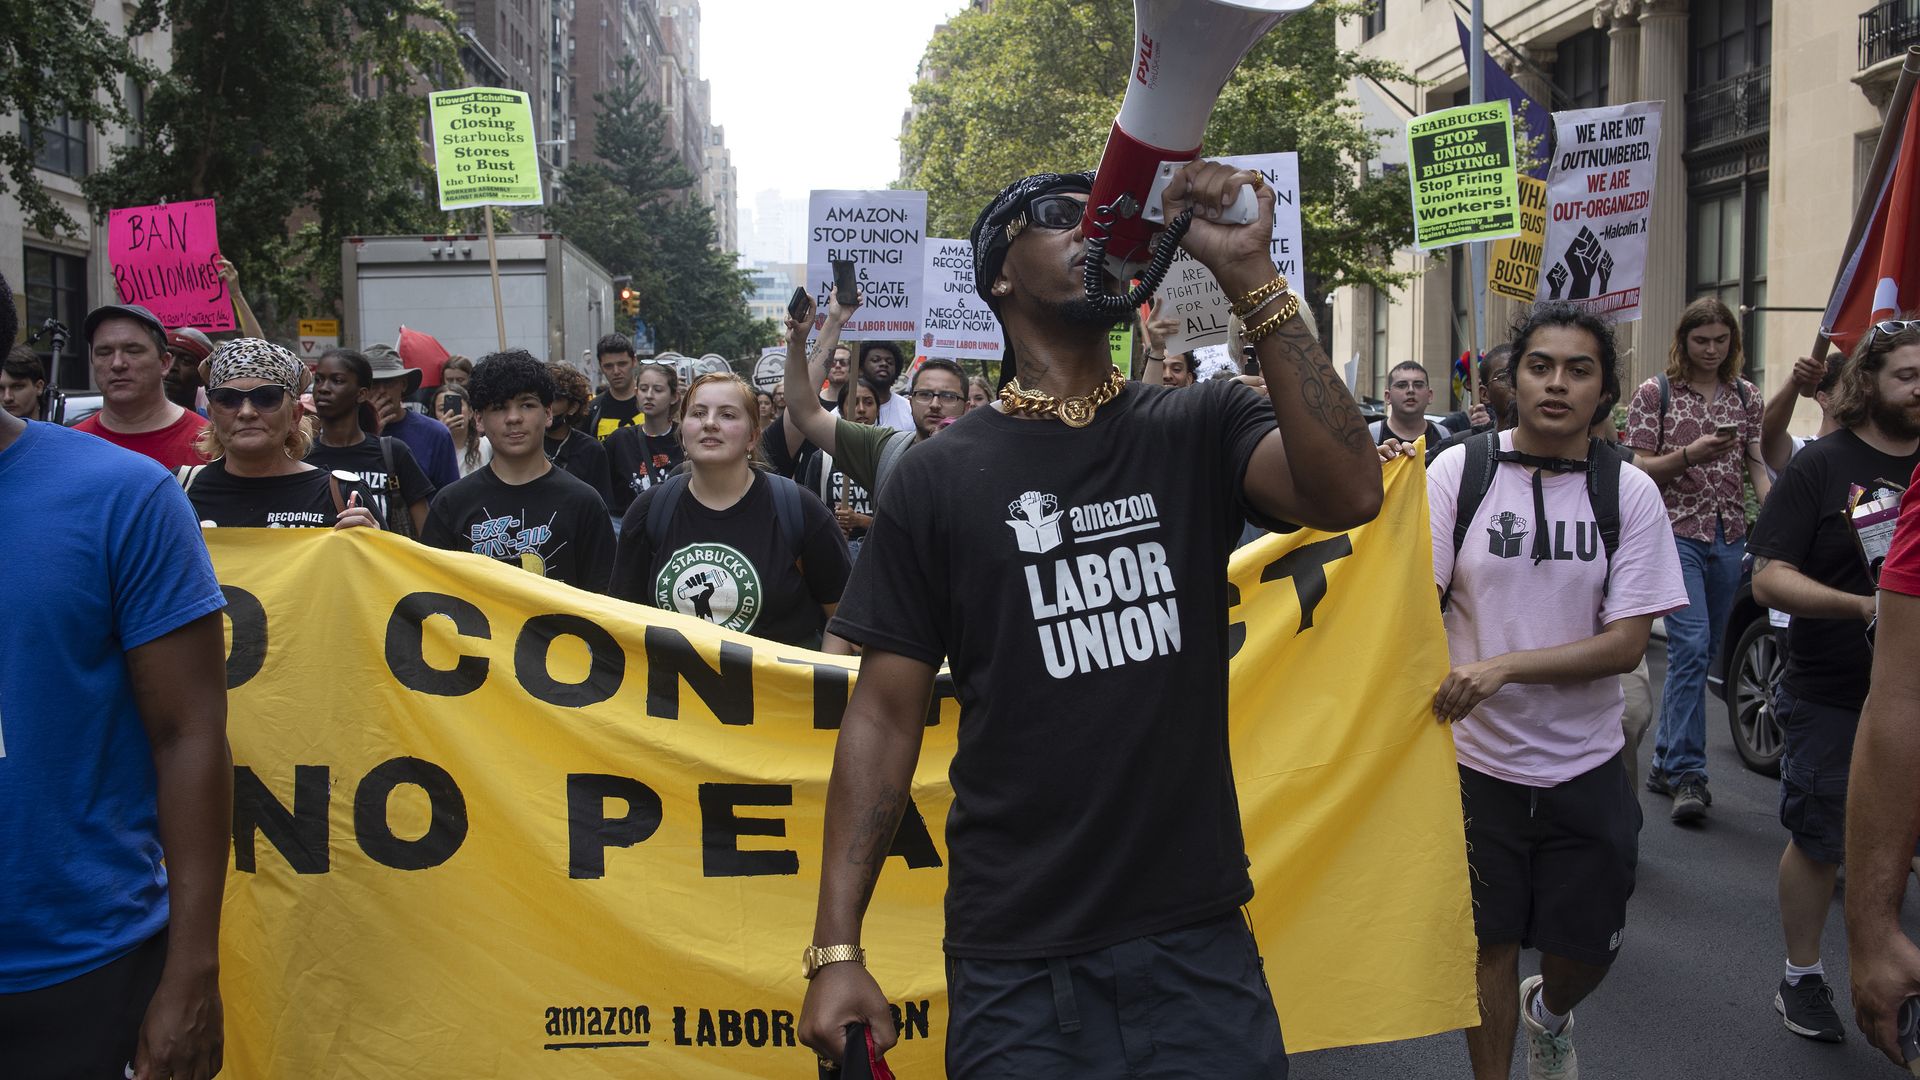 Chris Smalls, a leader of the Amazon Labor Union, leads a march in New York City on Sept. 5.